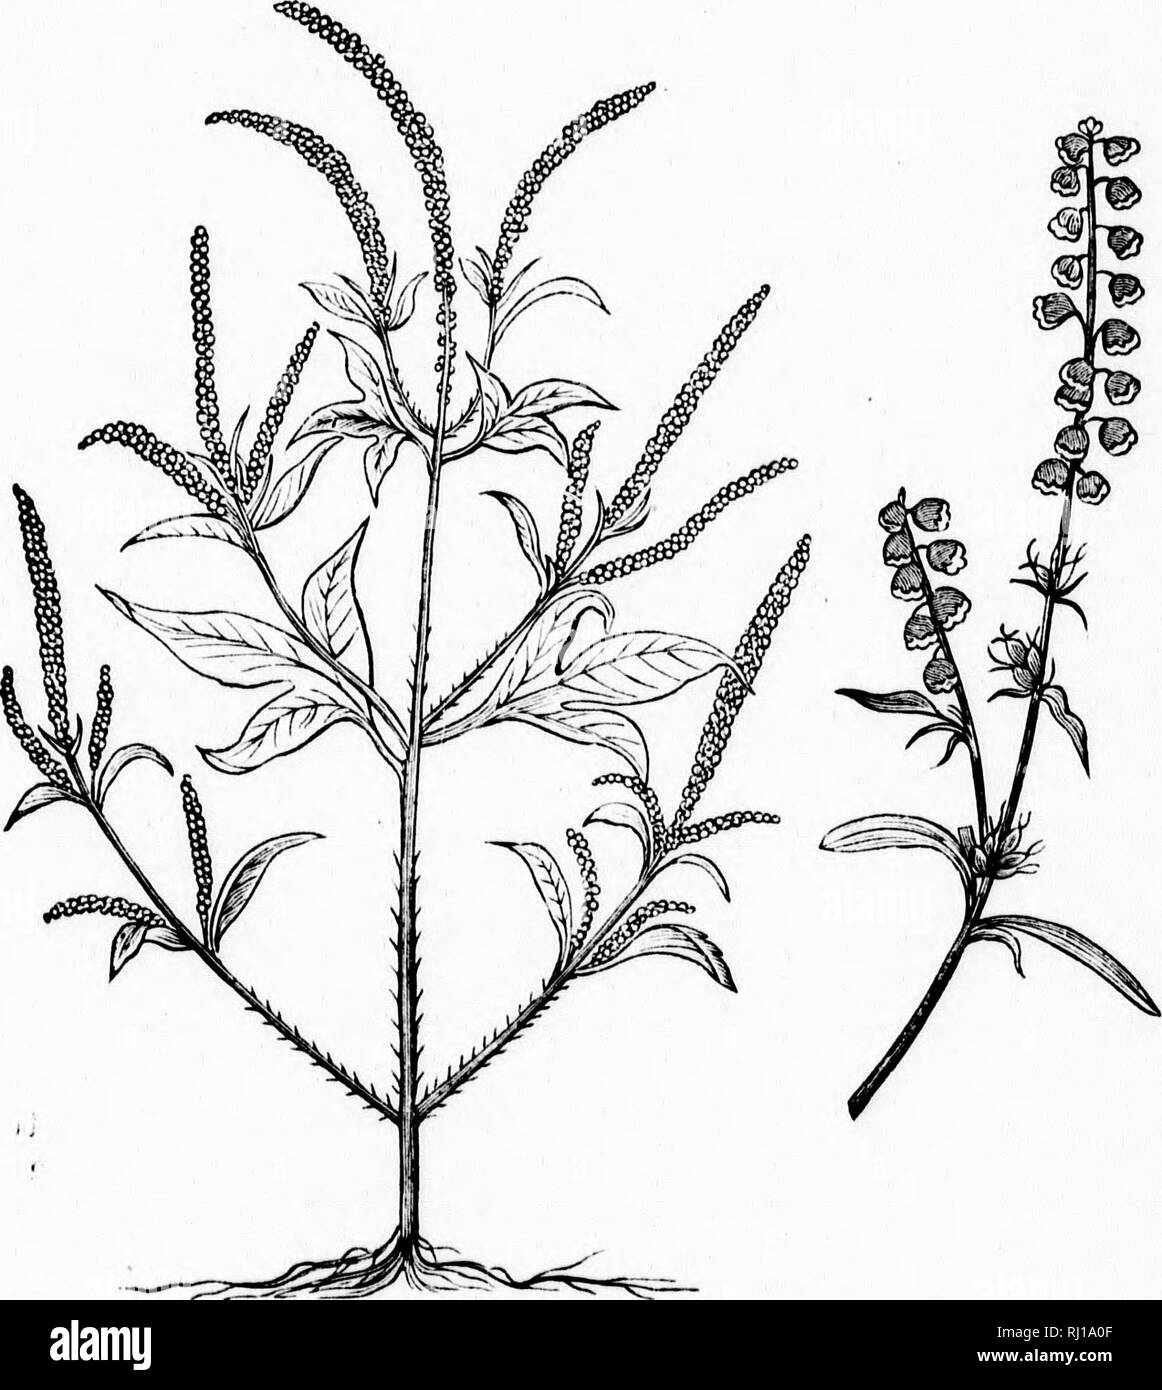 Weeds, and modes of destroying them [microform]. Weed control; Weed  control; Weeds; Mauvaises herbes, Lutte contre les; Mauvaises herbes, Lutte  contre les; Mauvaises herbes. 25 :r soedg include l-fcS. lediura 8